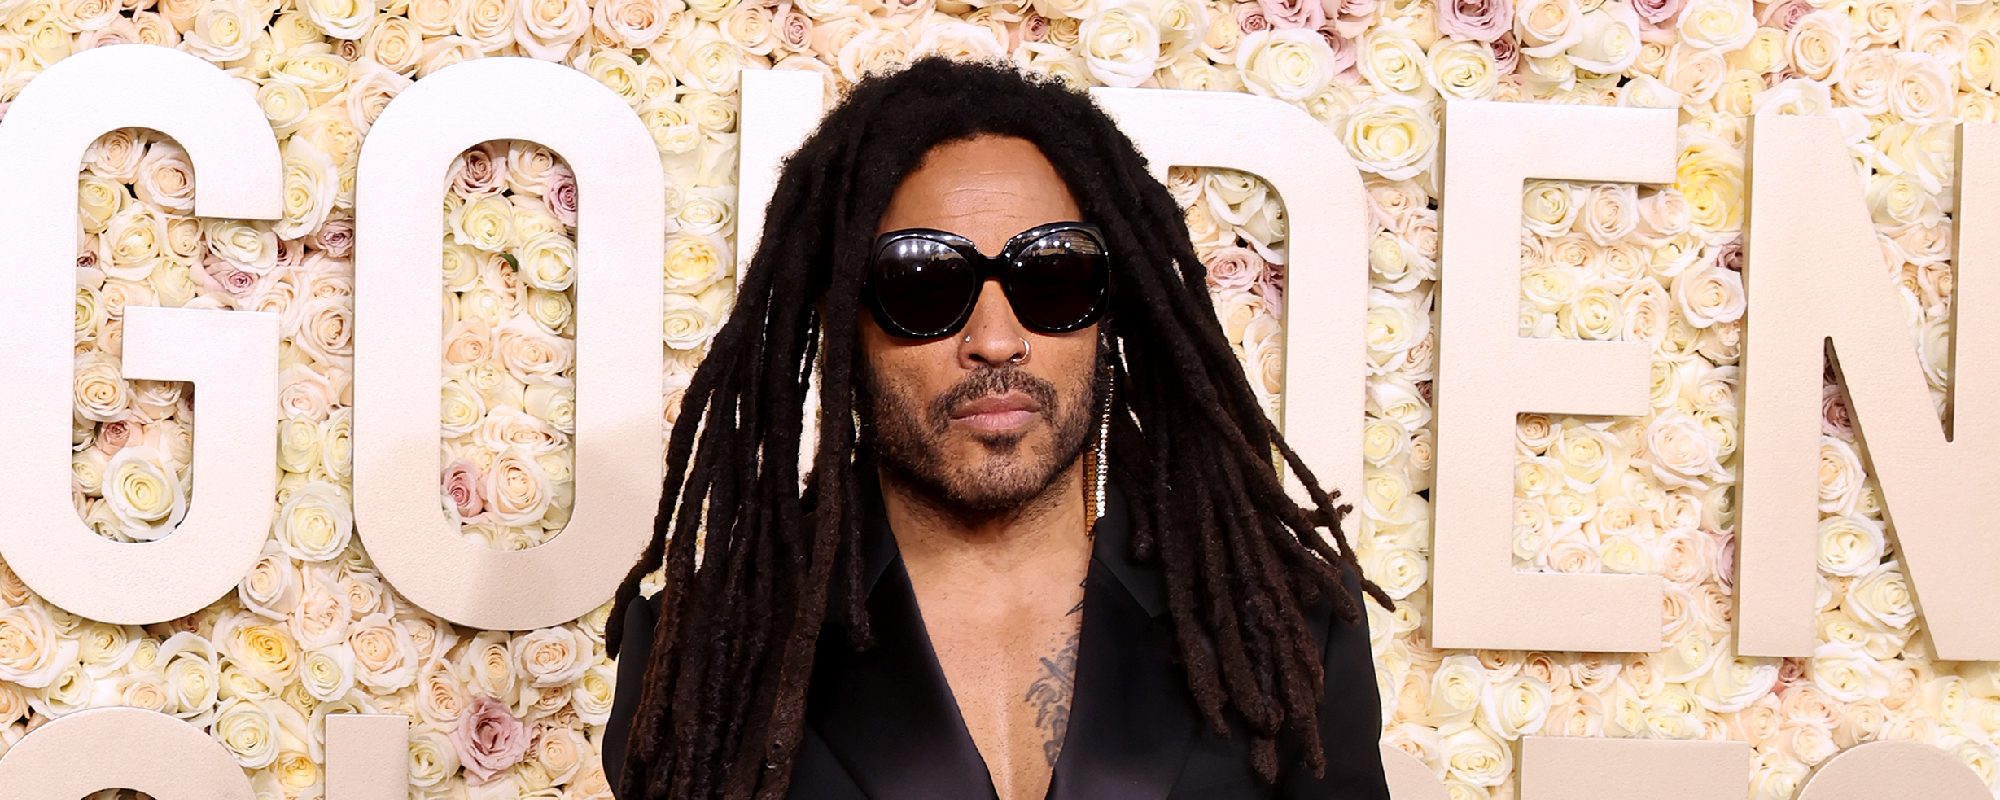 Lenny Kravitz Discusses Career in Music and Being Told He “Wasn’t White Enough”